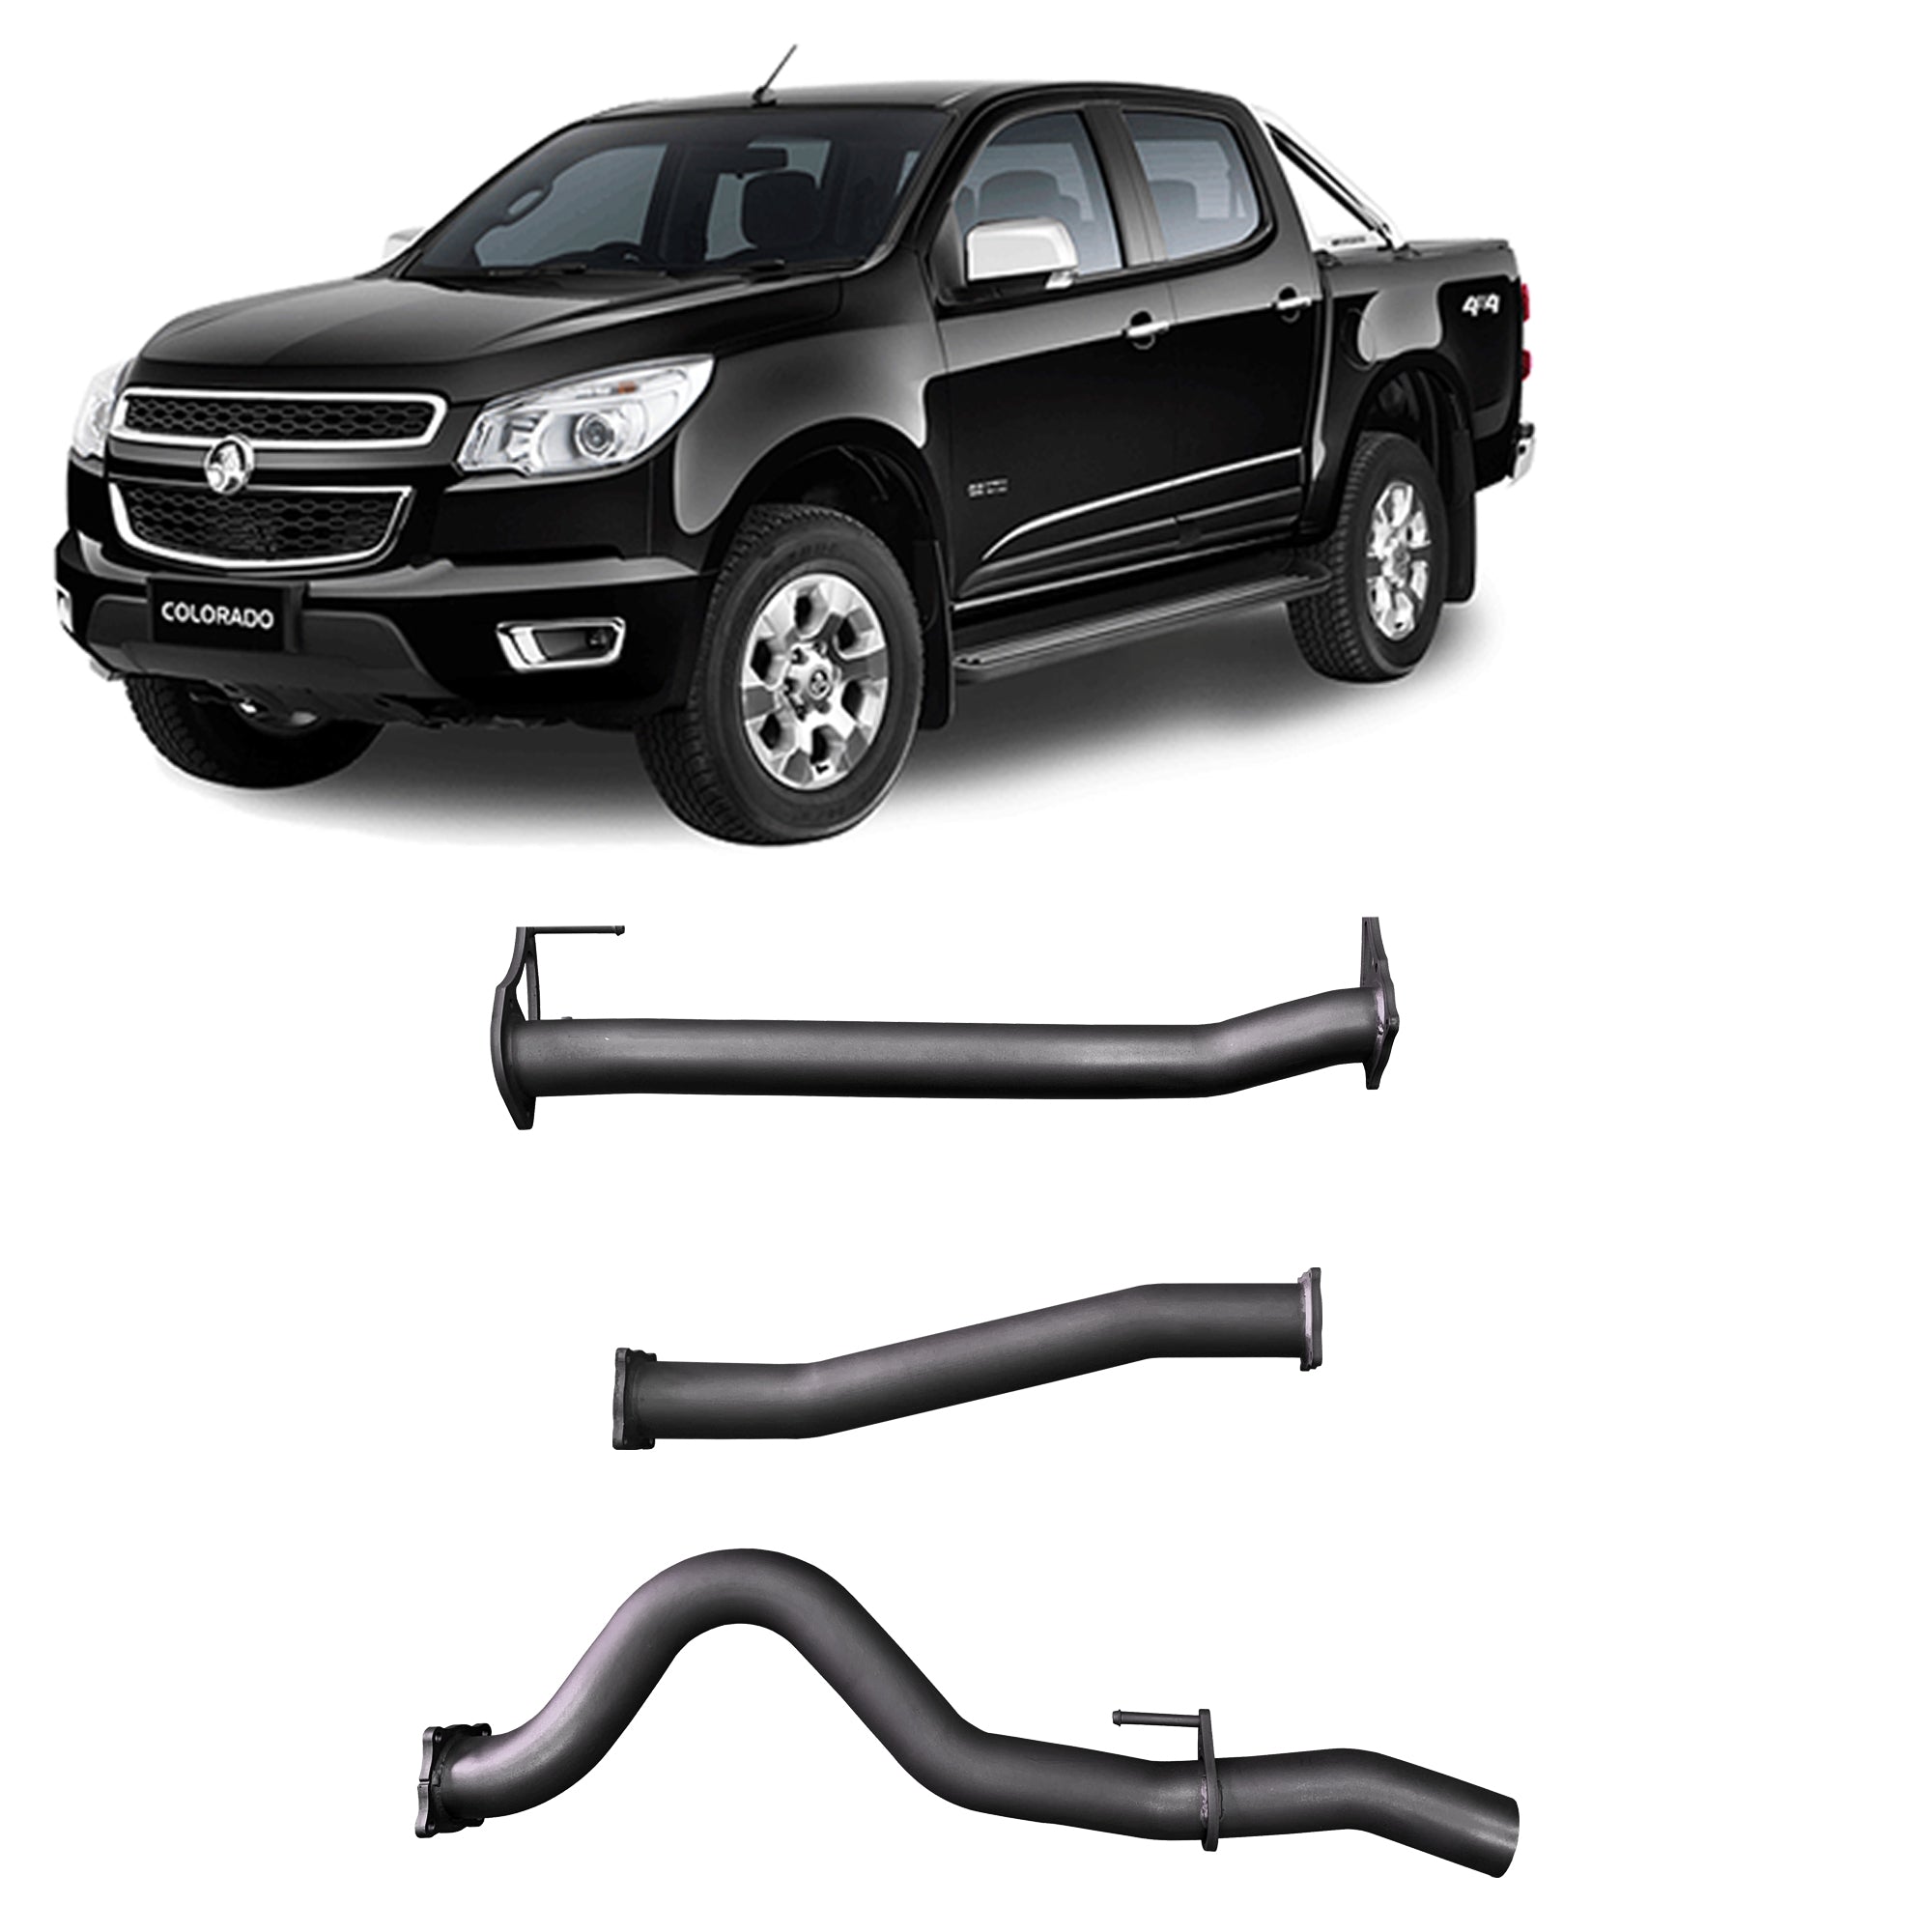 Redback Extreme Duty Exhaust to suit Holden Colorado RG 2.8L (09/2016 - on)